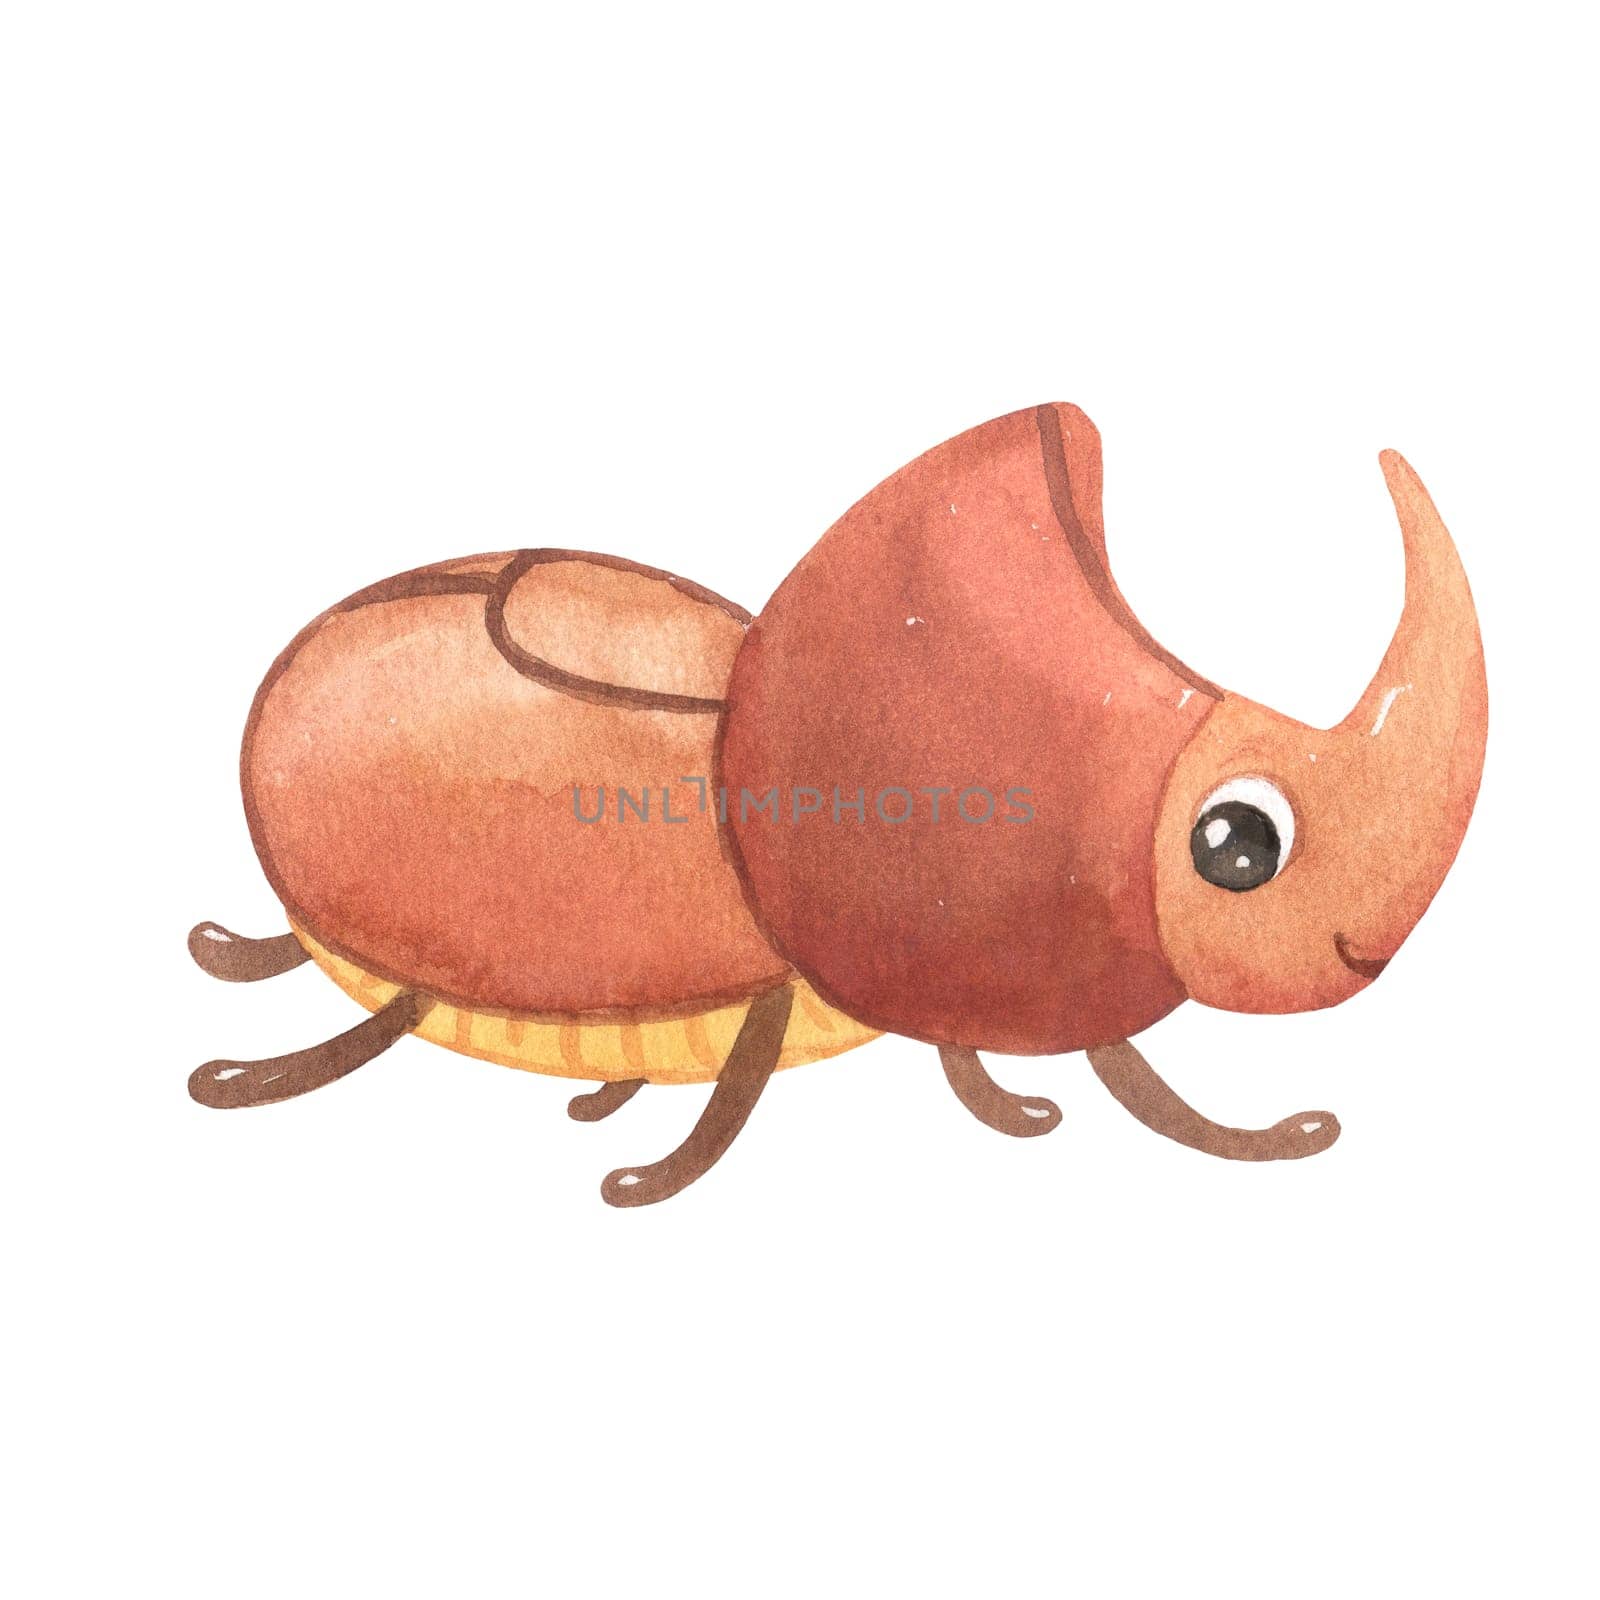 Cute smiling rhinoceros beetle isolated on white. Funny insect for children. Watercolor cartoon illustration by ElenaPlatova